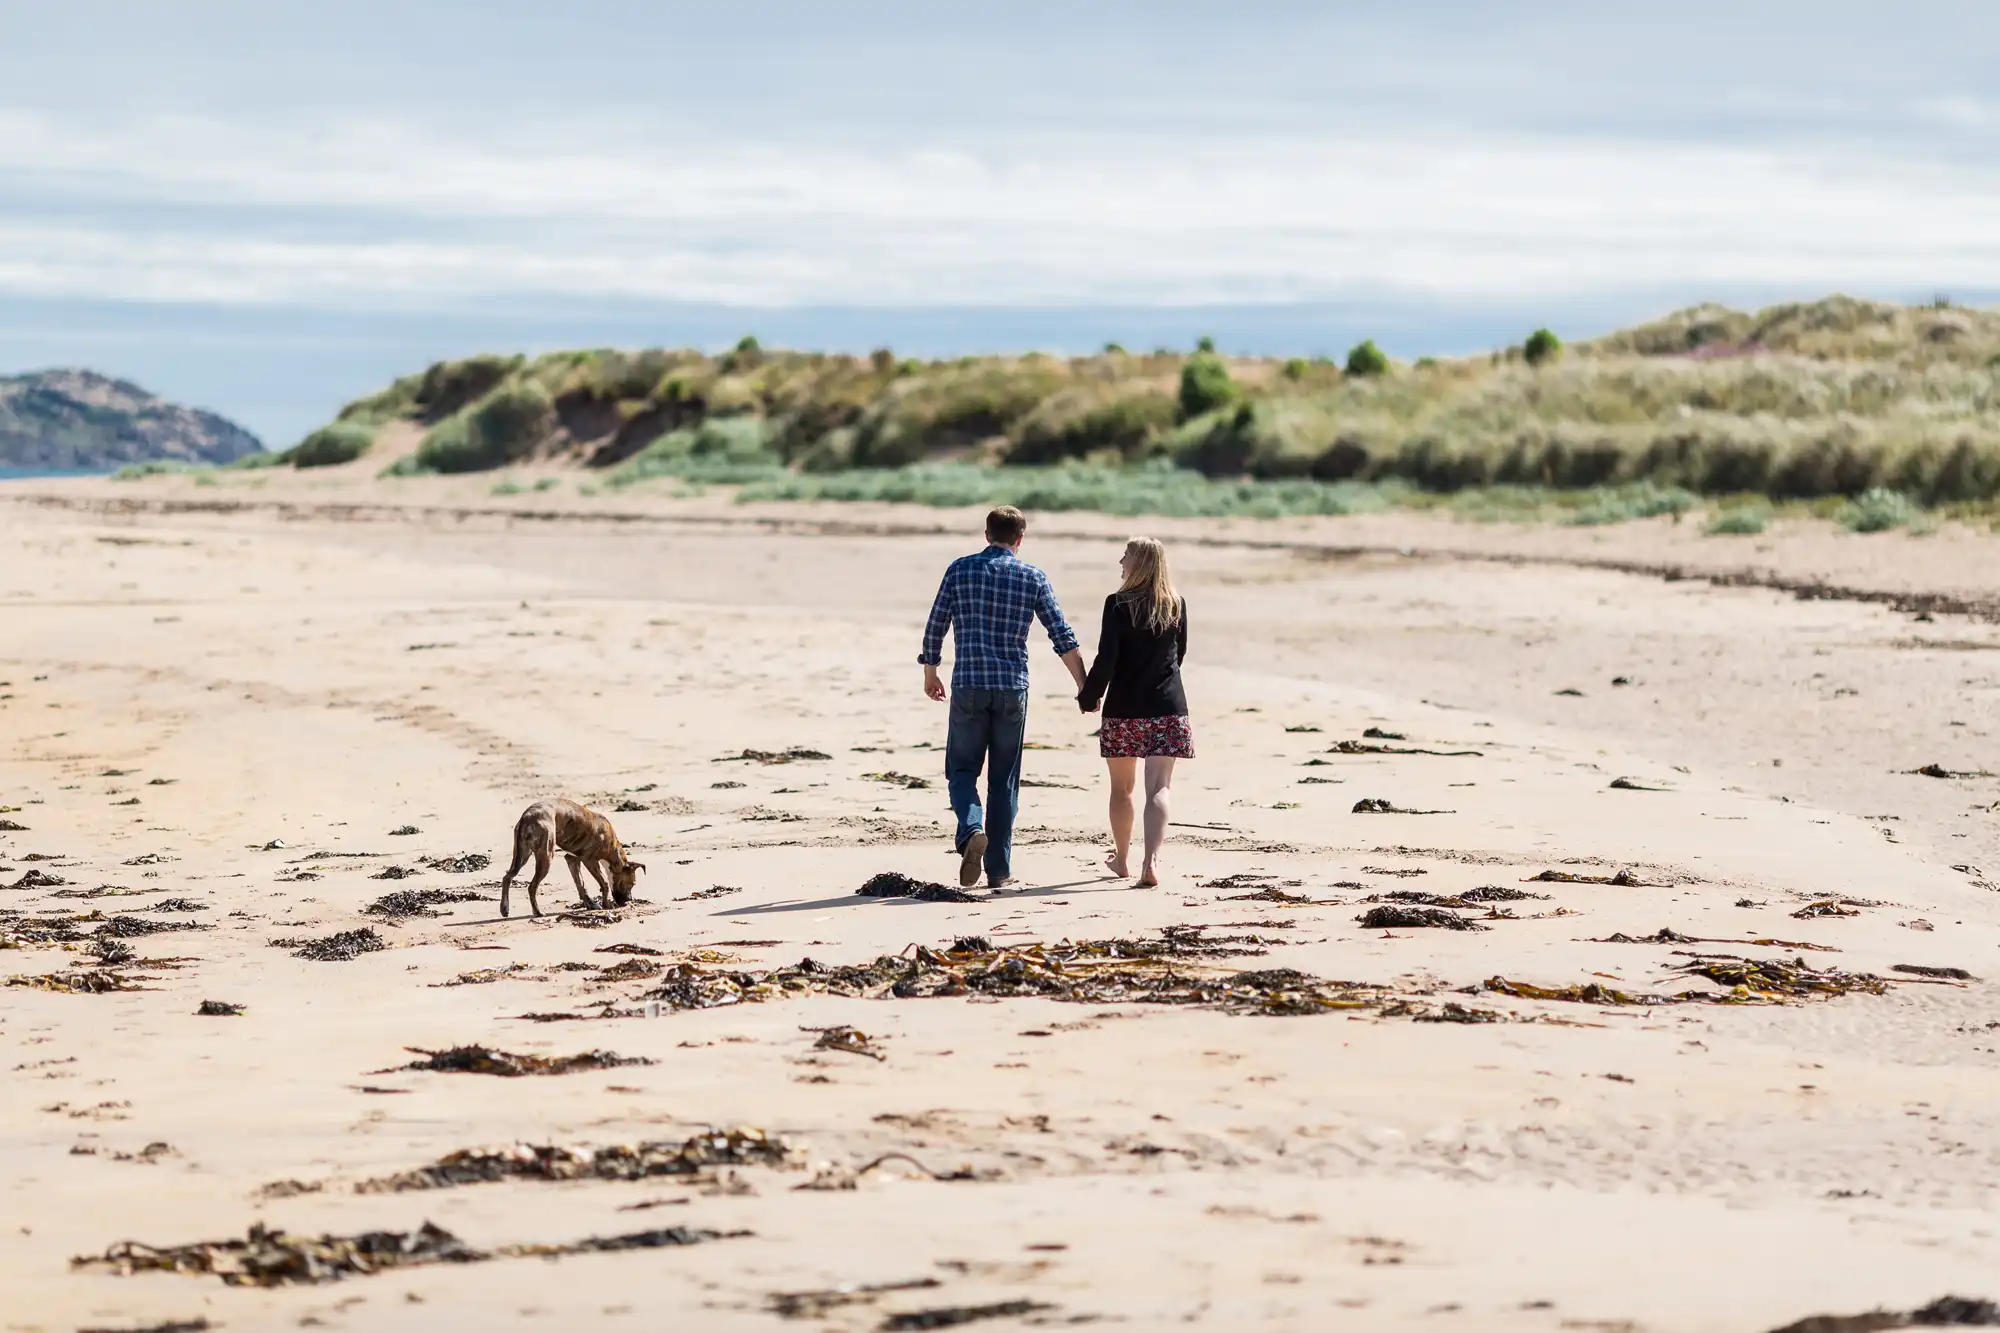 A couple walks along a sandy beach with their dog, surrounded by seaweed and sand dunes under a cloudy sky.